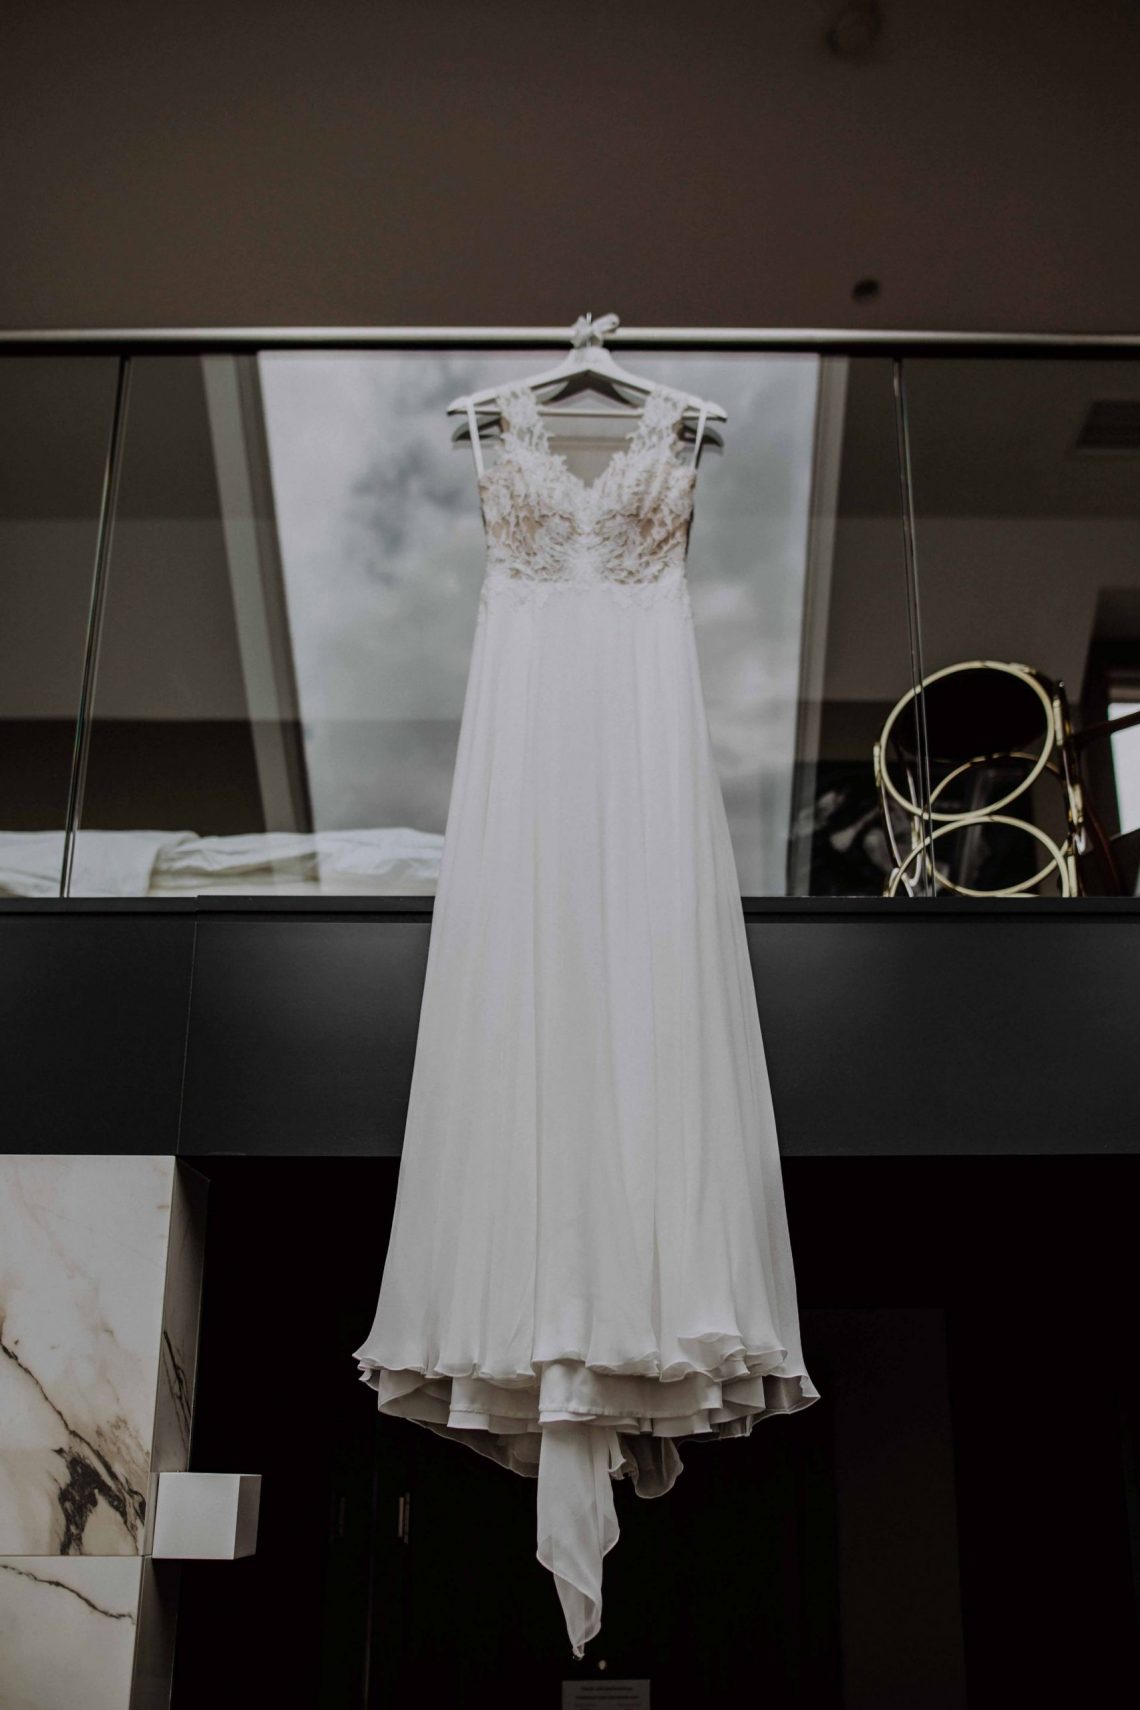 Wedding On A Budget: Bridal Dress For Less